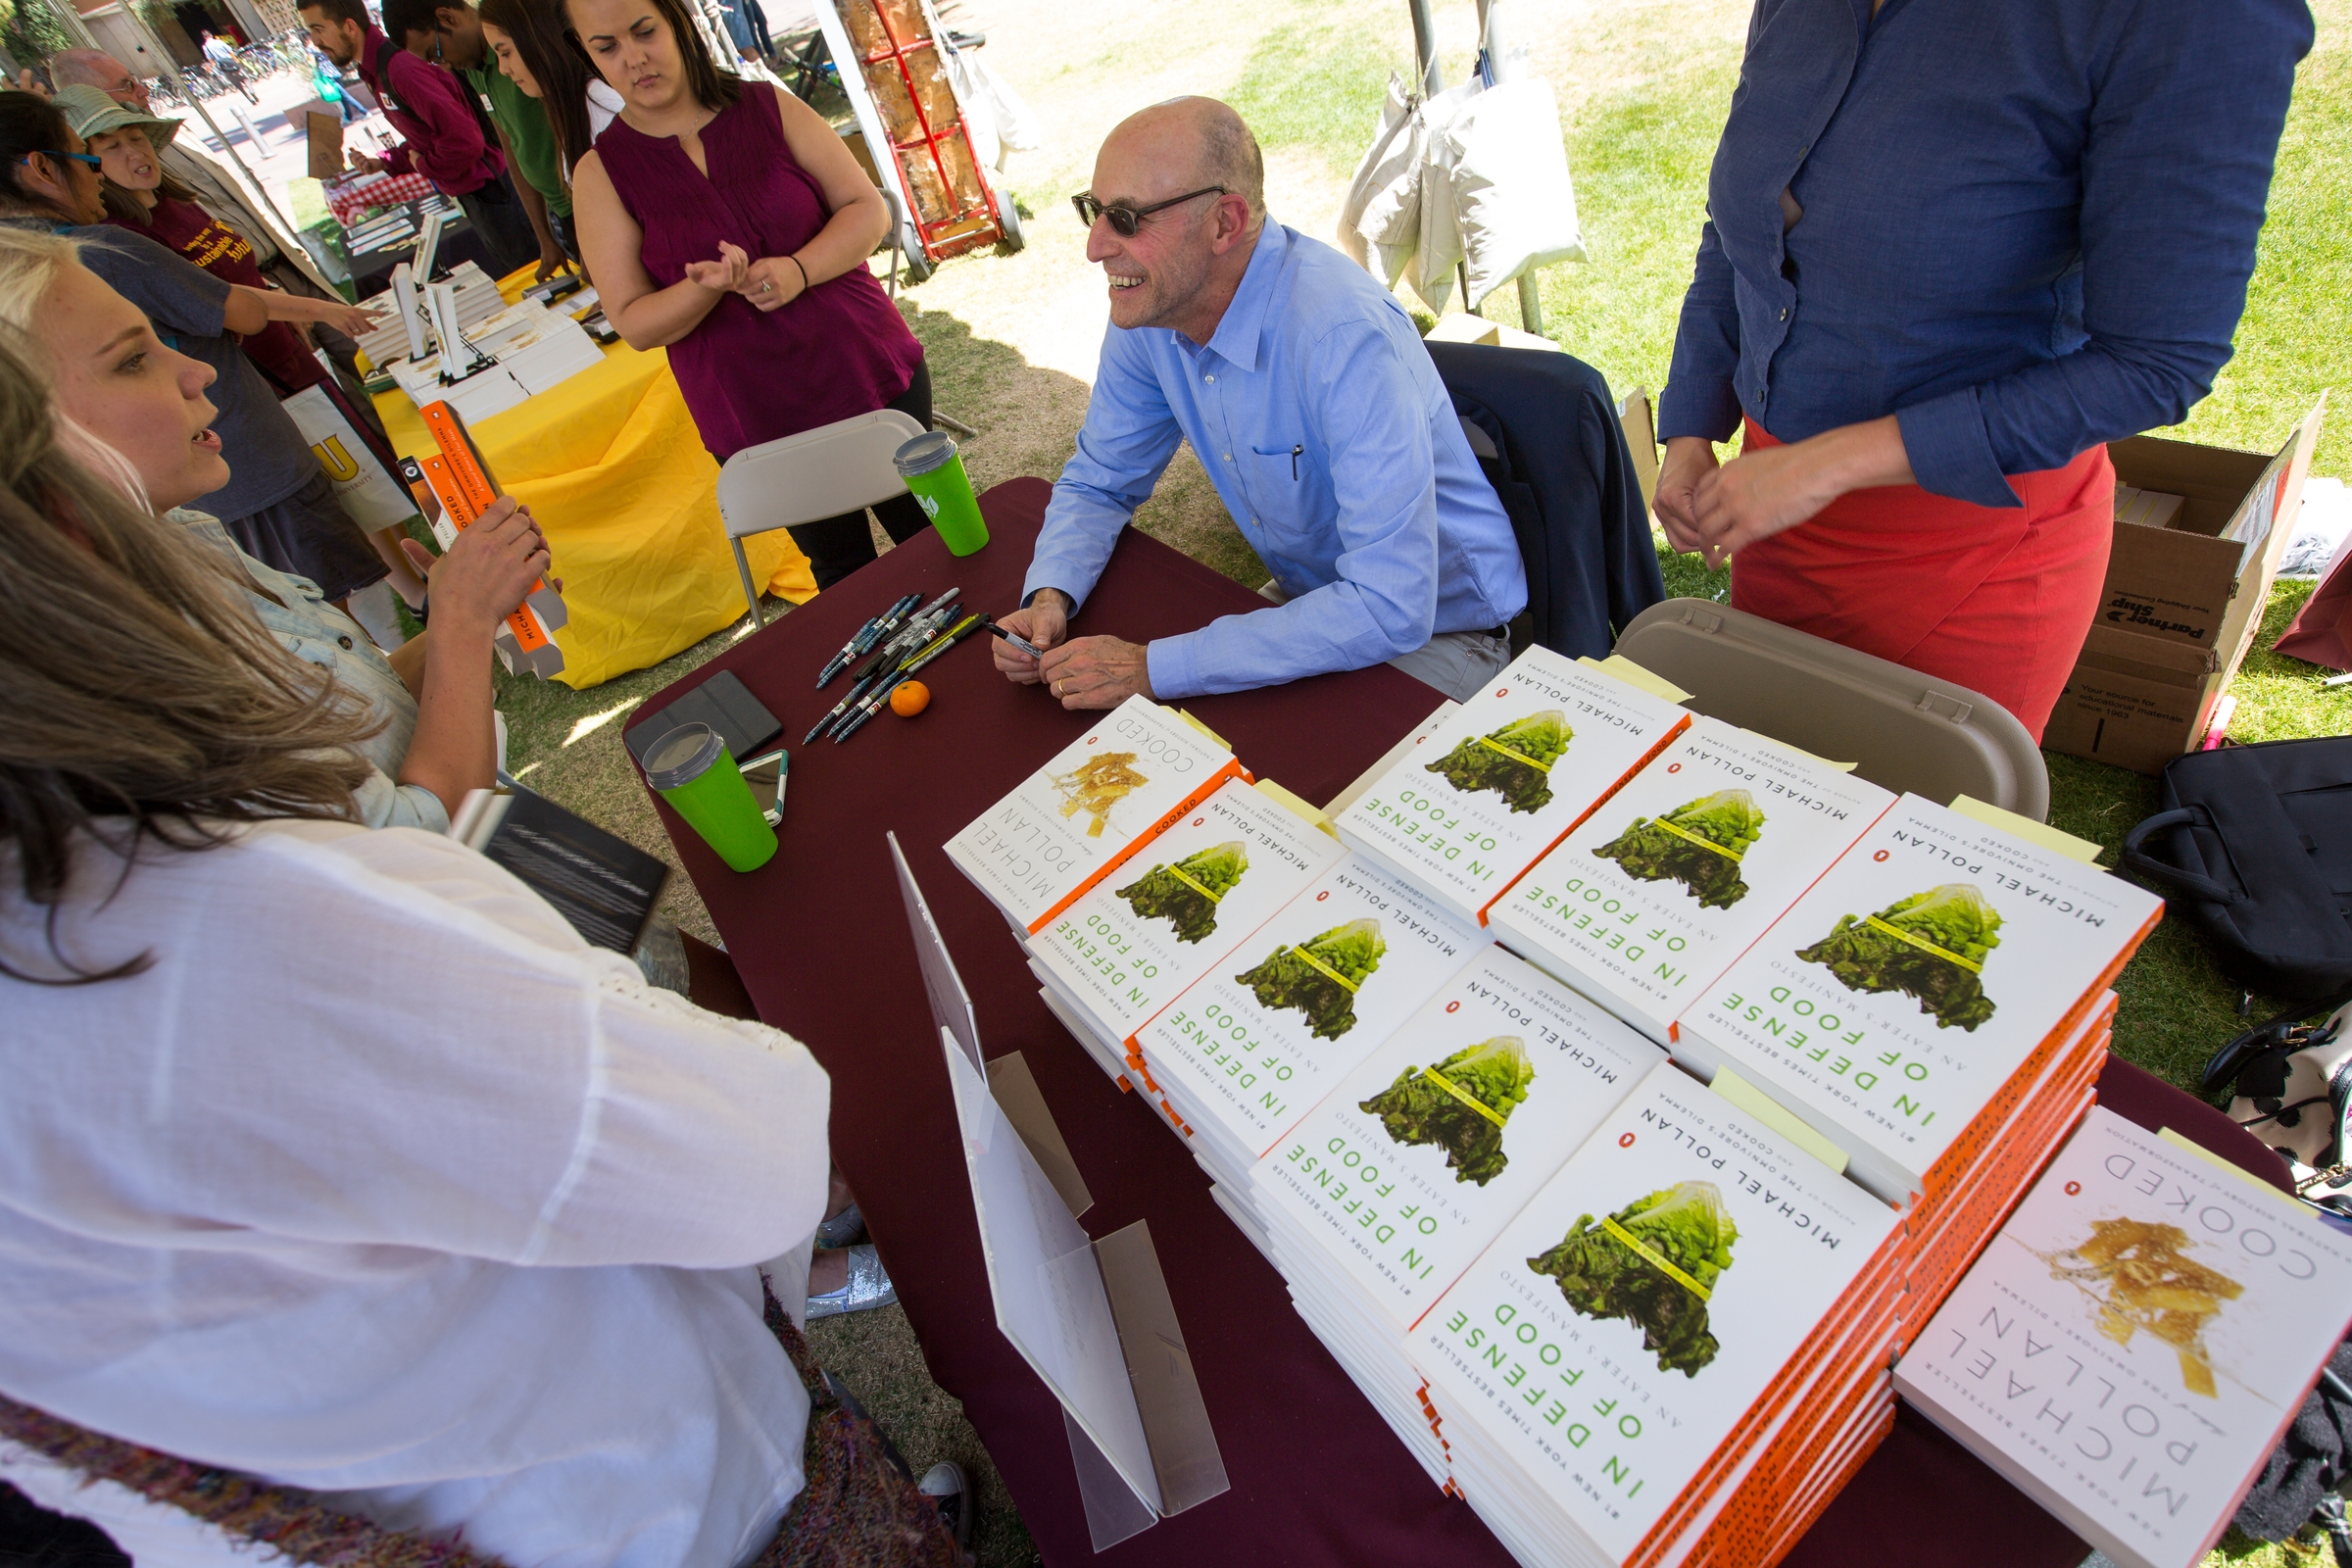 Michael Pollan signs books at the School of Sustainability picnic.